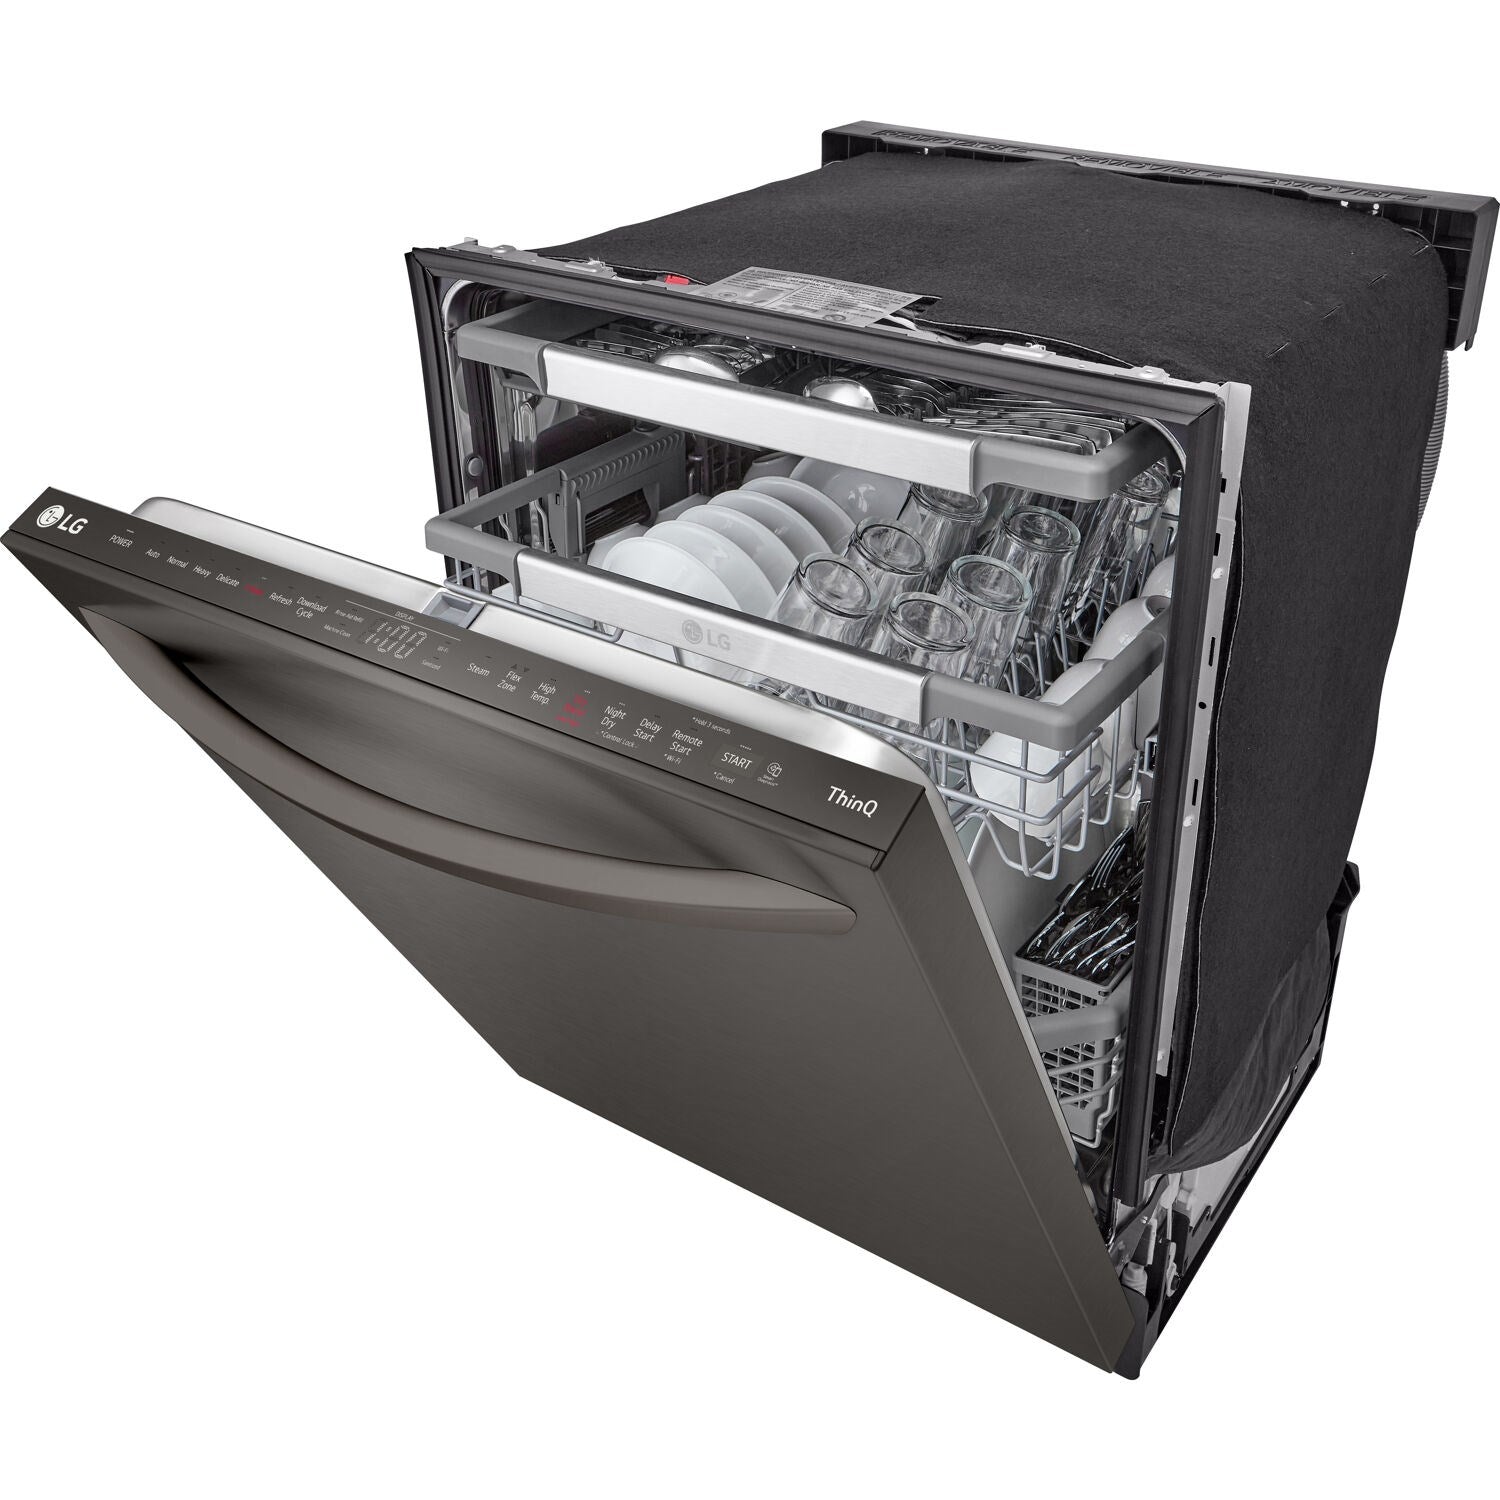 LG Fully Integrated Built In Dishwashers LDTH7972D